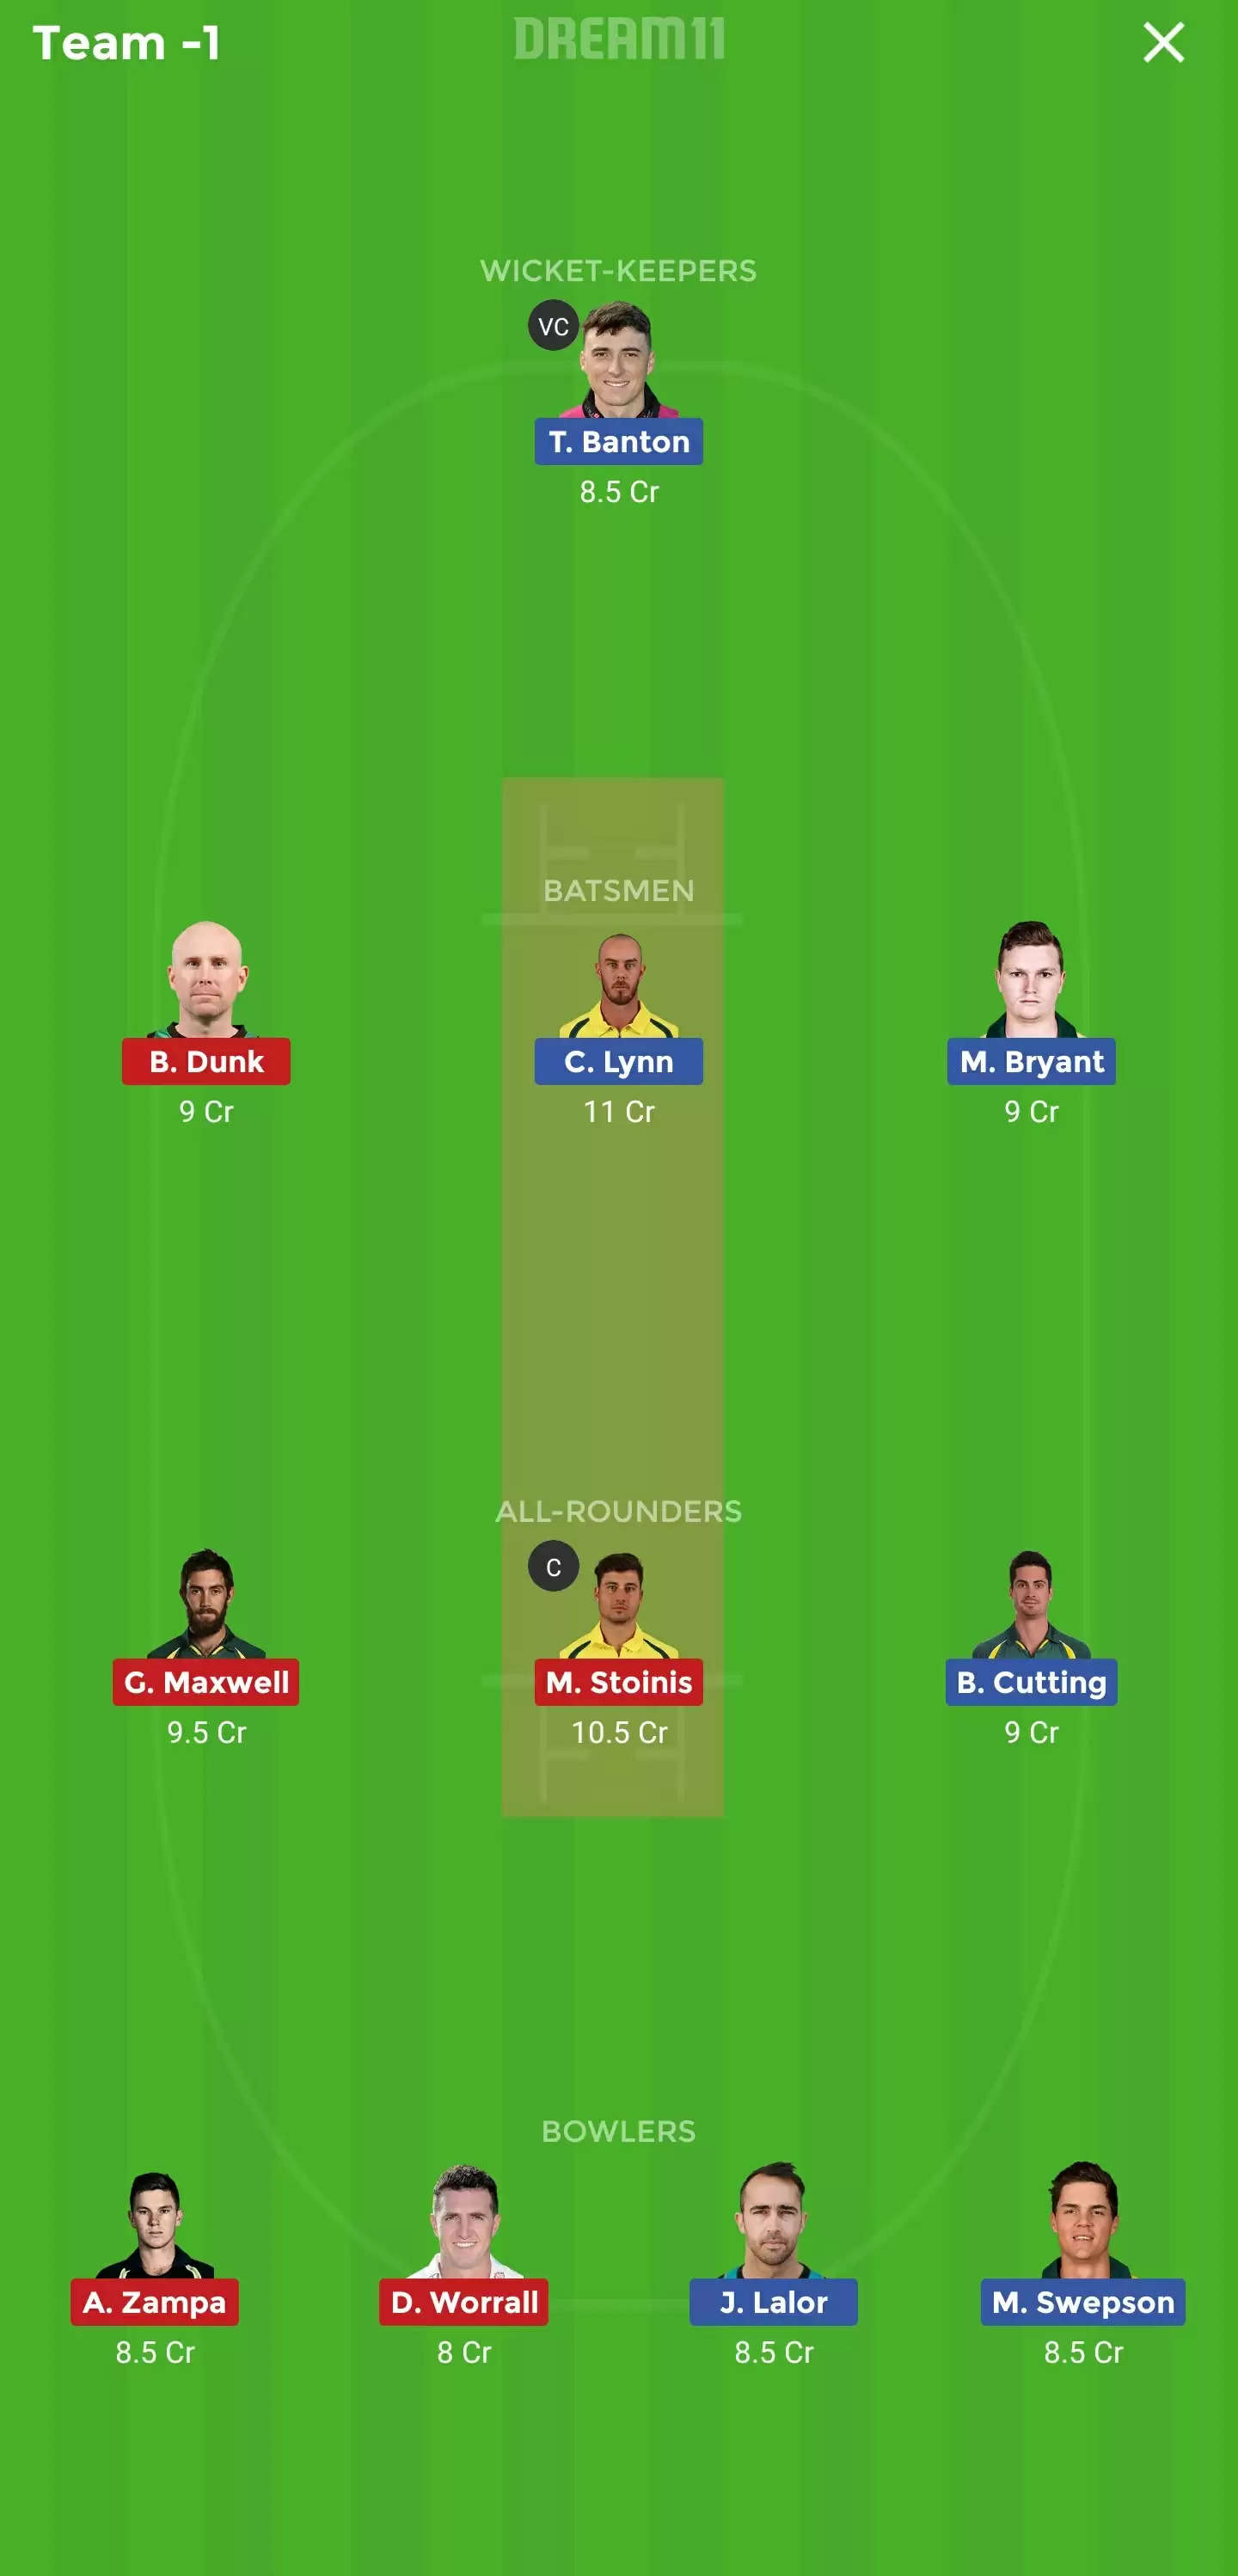 BH vs MS Dream11 Fantasy Cricket Prediction, Preview, Tips, Playing XI, Team, Pitch Report and Weather Conditions | BBL 2019/20